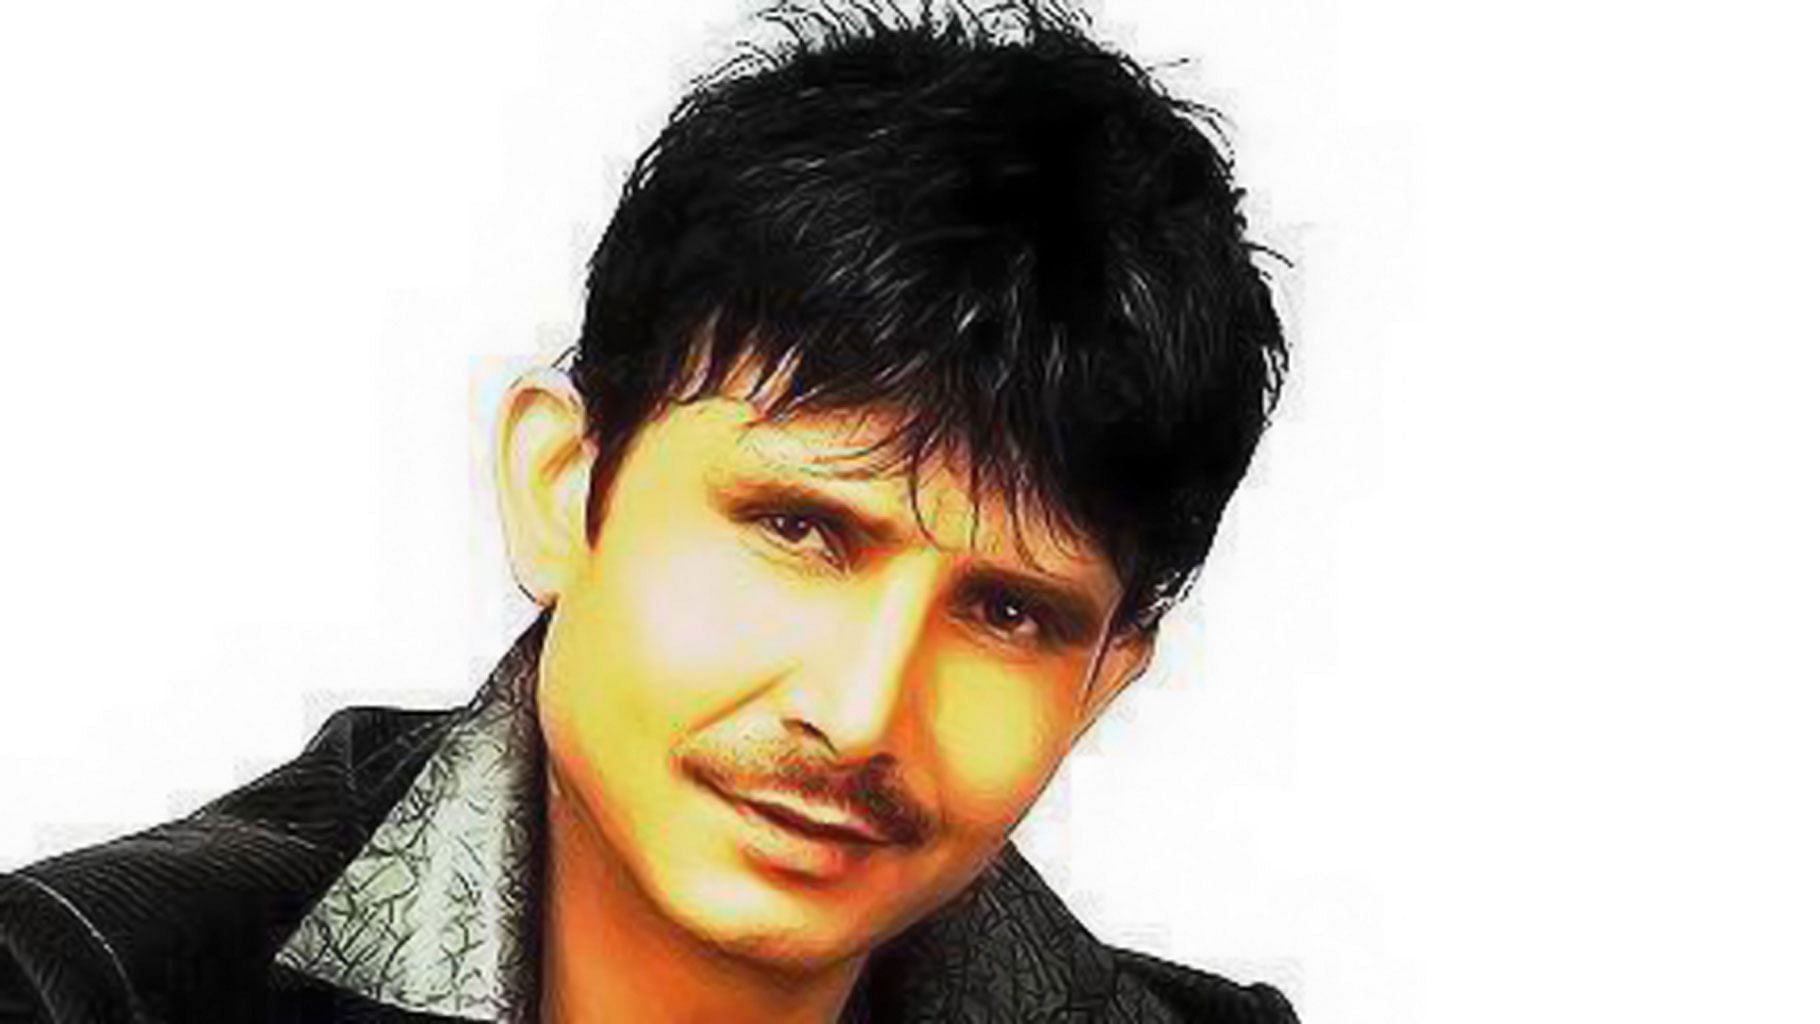 Twitter loudmouth and actor Kamaal R Khan. (Photo courtesy: <a href="https://www.facebook.com/KRK.Kamaalkhan/photos_stream">Kamaal R Khan</a>‘s Facebook page)